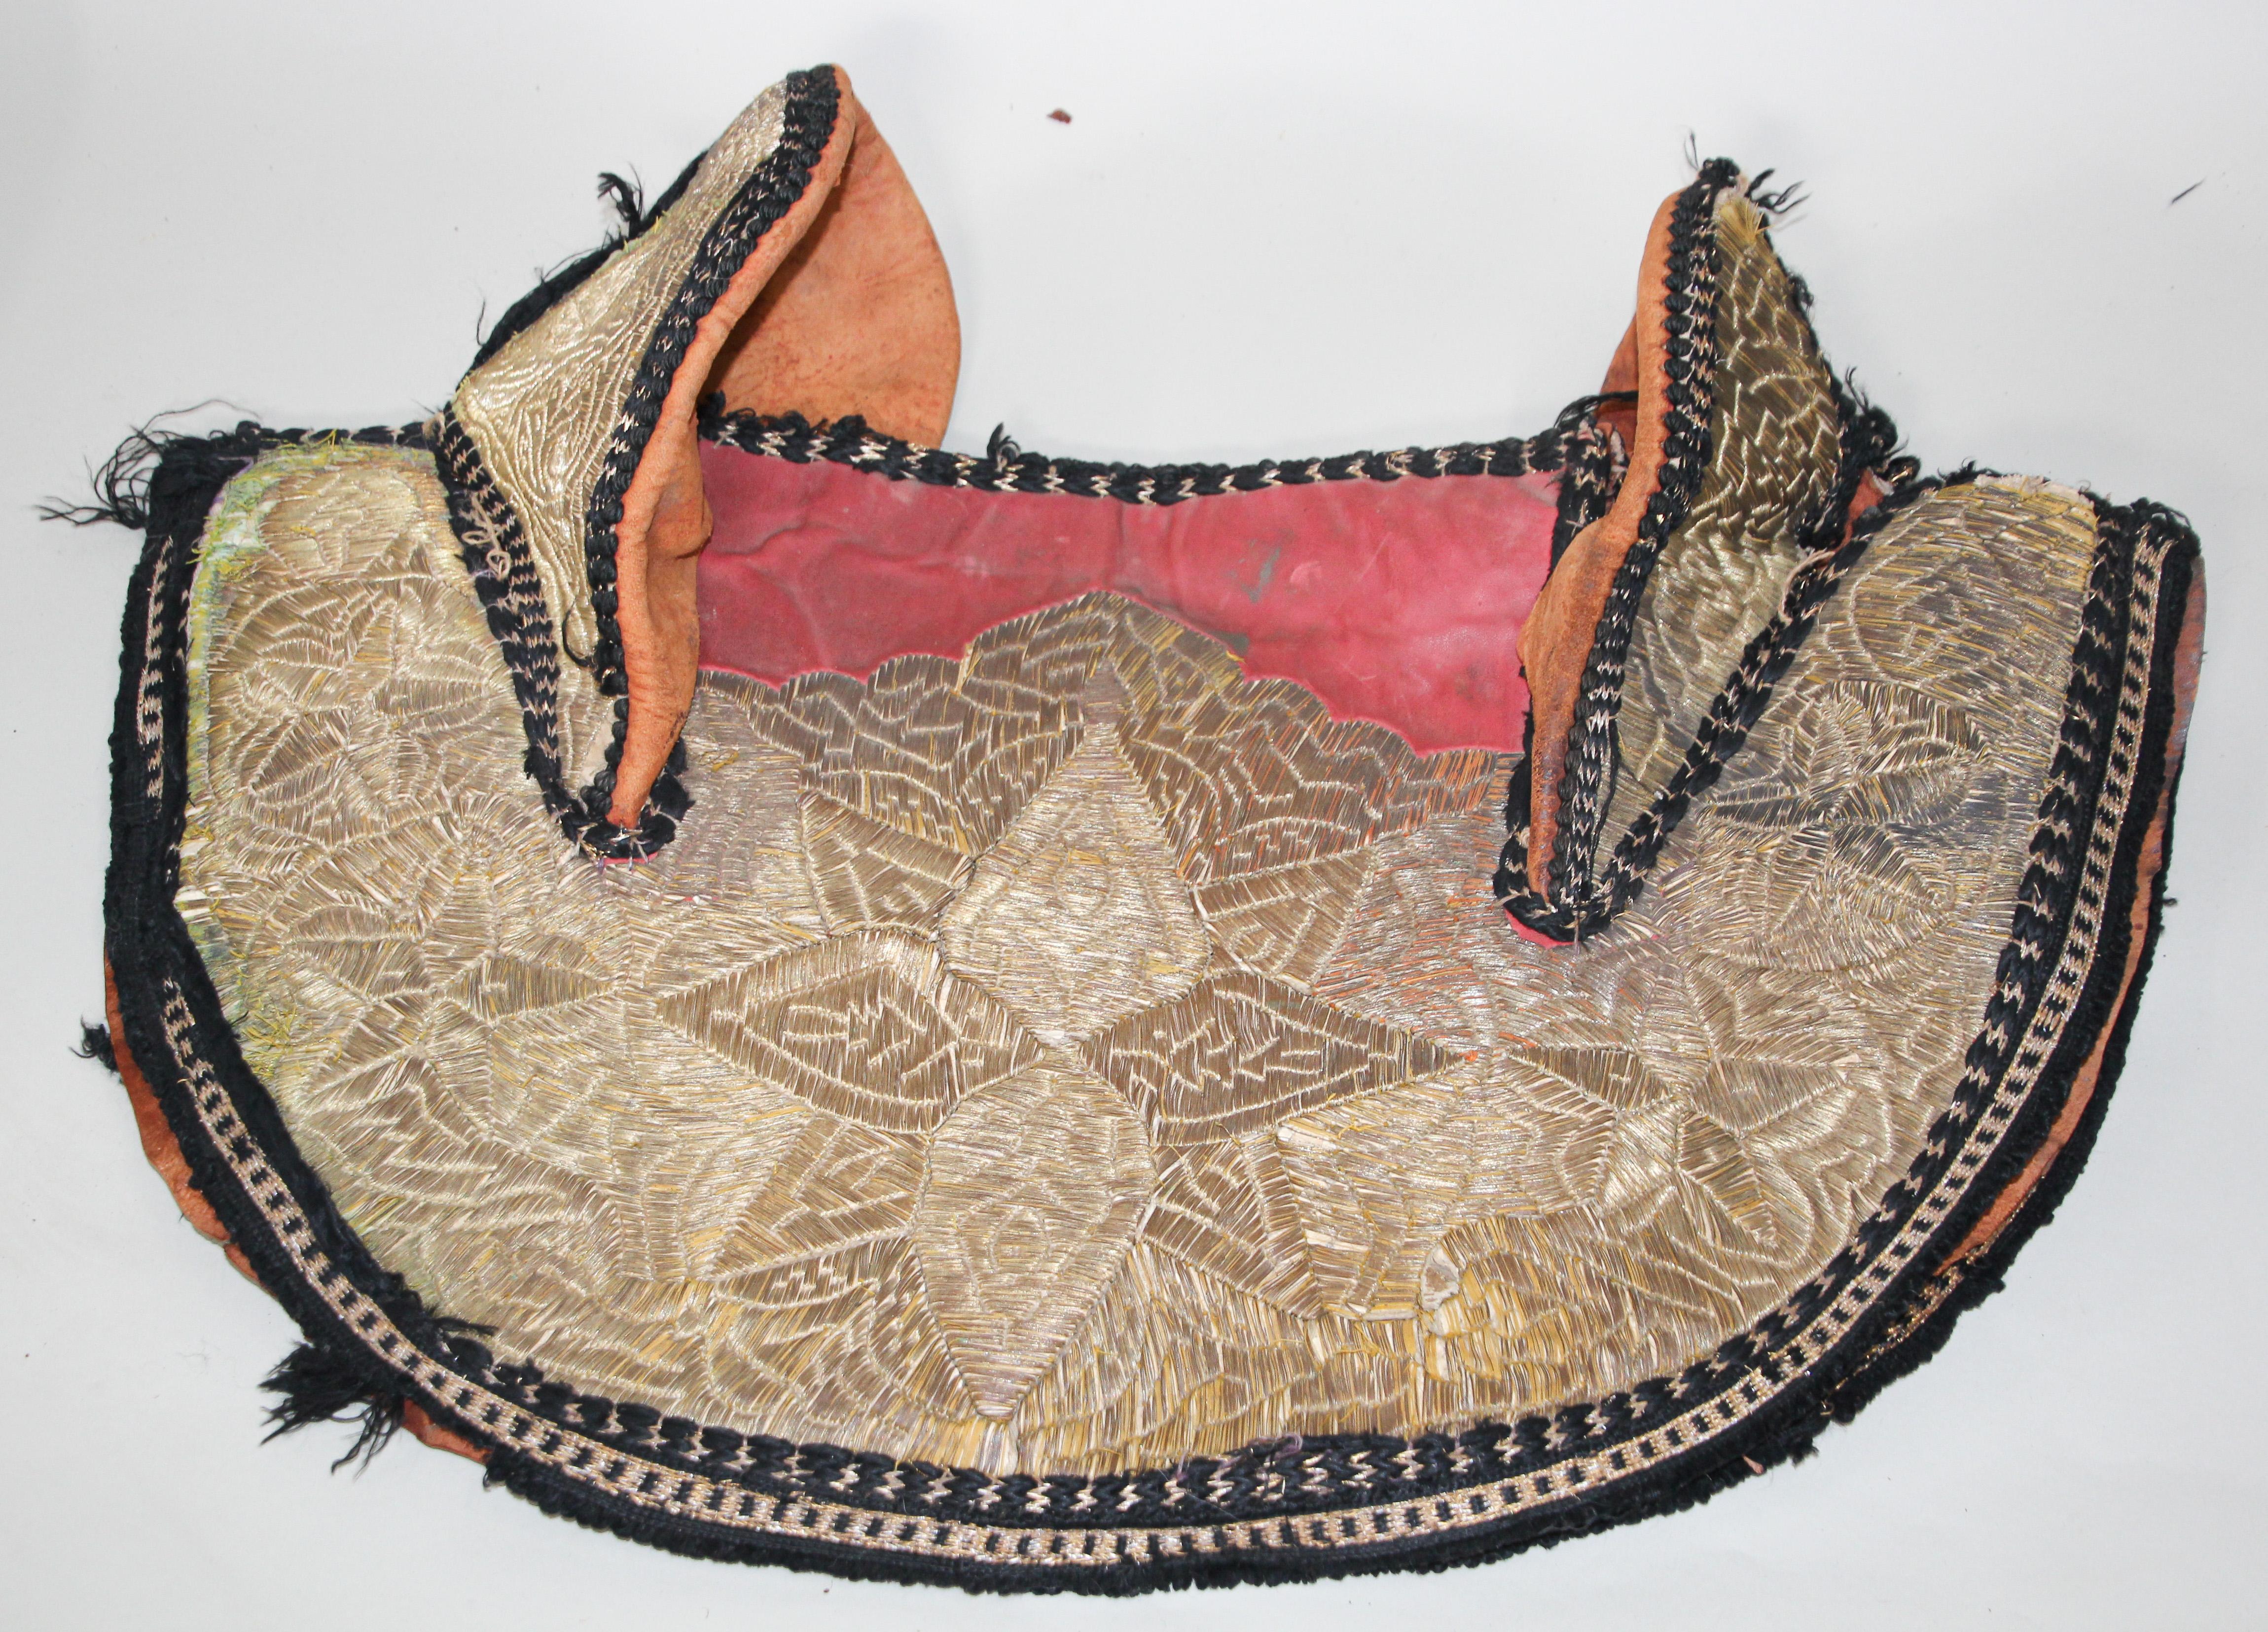 Handcrafted Moroccan horse saddle cover made for a ceremonial Festival and shows. Elaborately embroidered overall in gold threads, comprising of a saddle cover, the central section of the saddle pad and backing is made of red leather.
Heavily